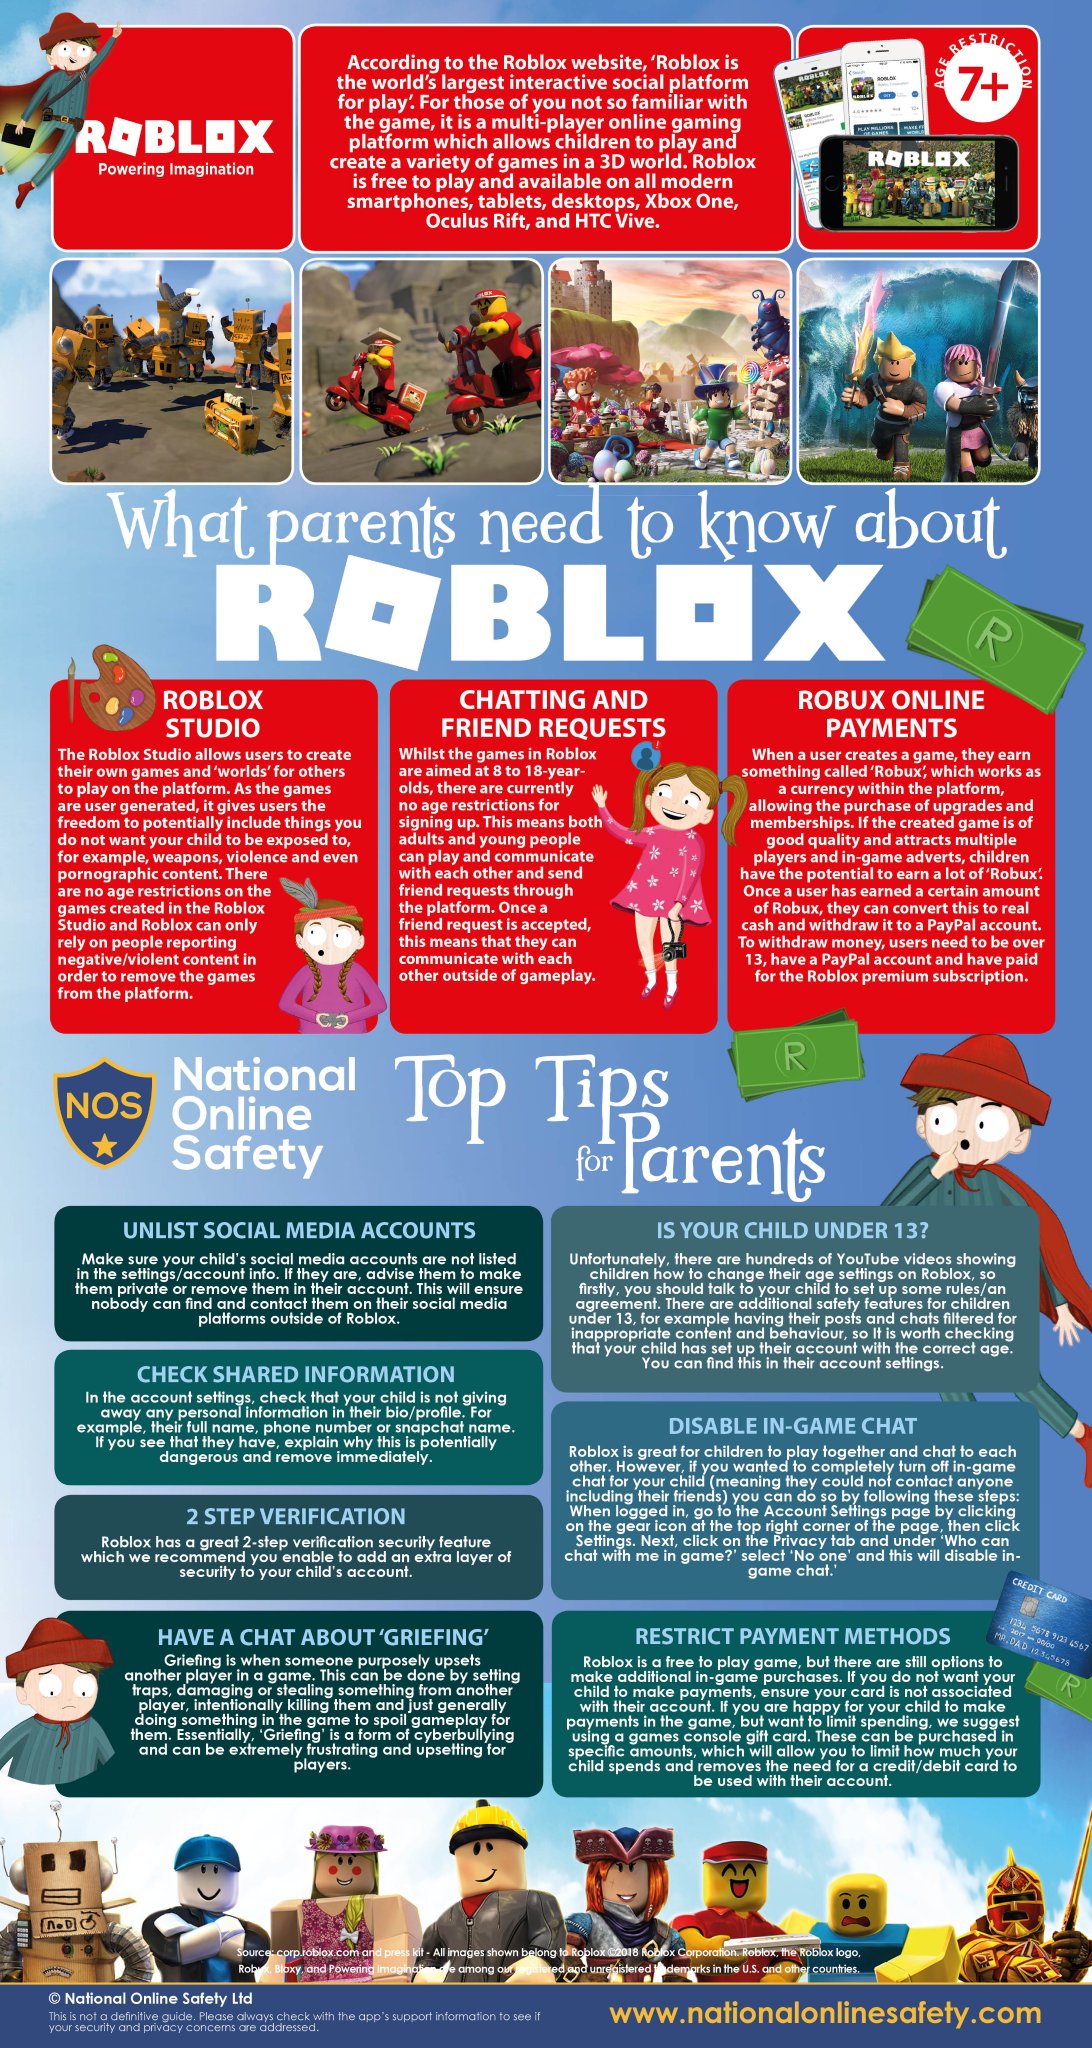 Roblox - what parents need to watch out for and how to sort secuirty